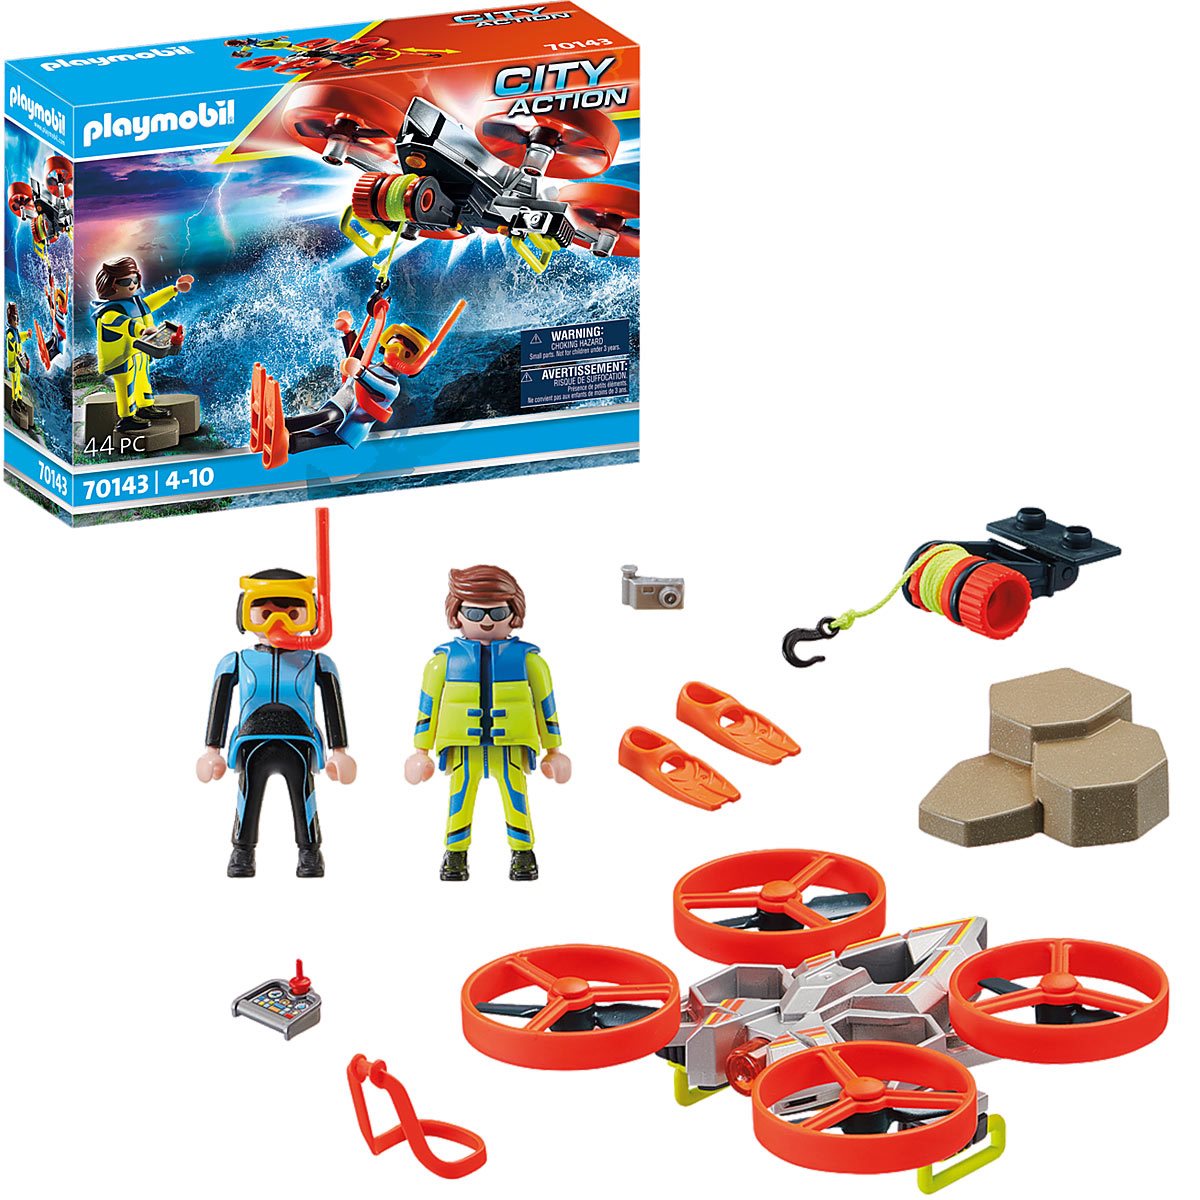 Playmobil - City Action: Diver Rescue With Drone